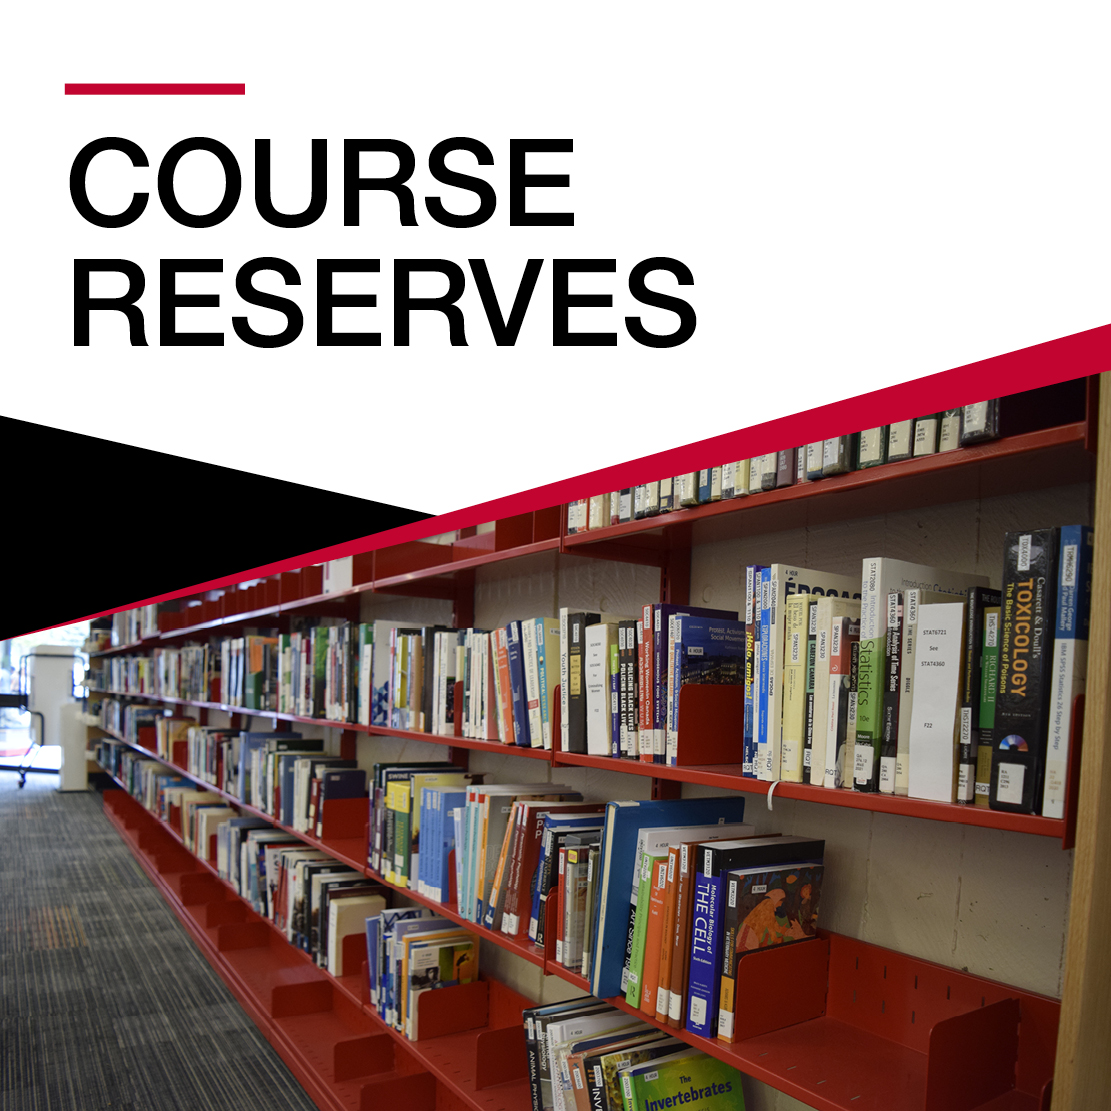 Course Reserves - Photo of red Course Reserves shelves in the McLaughlin Library